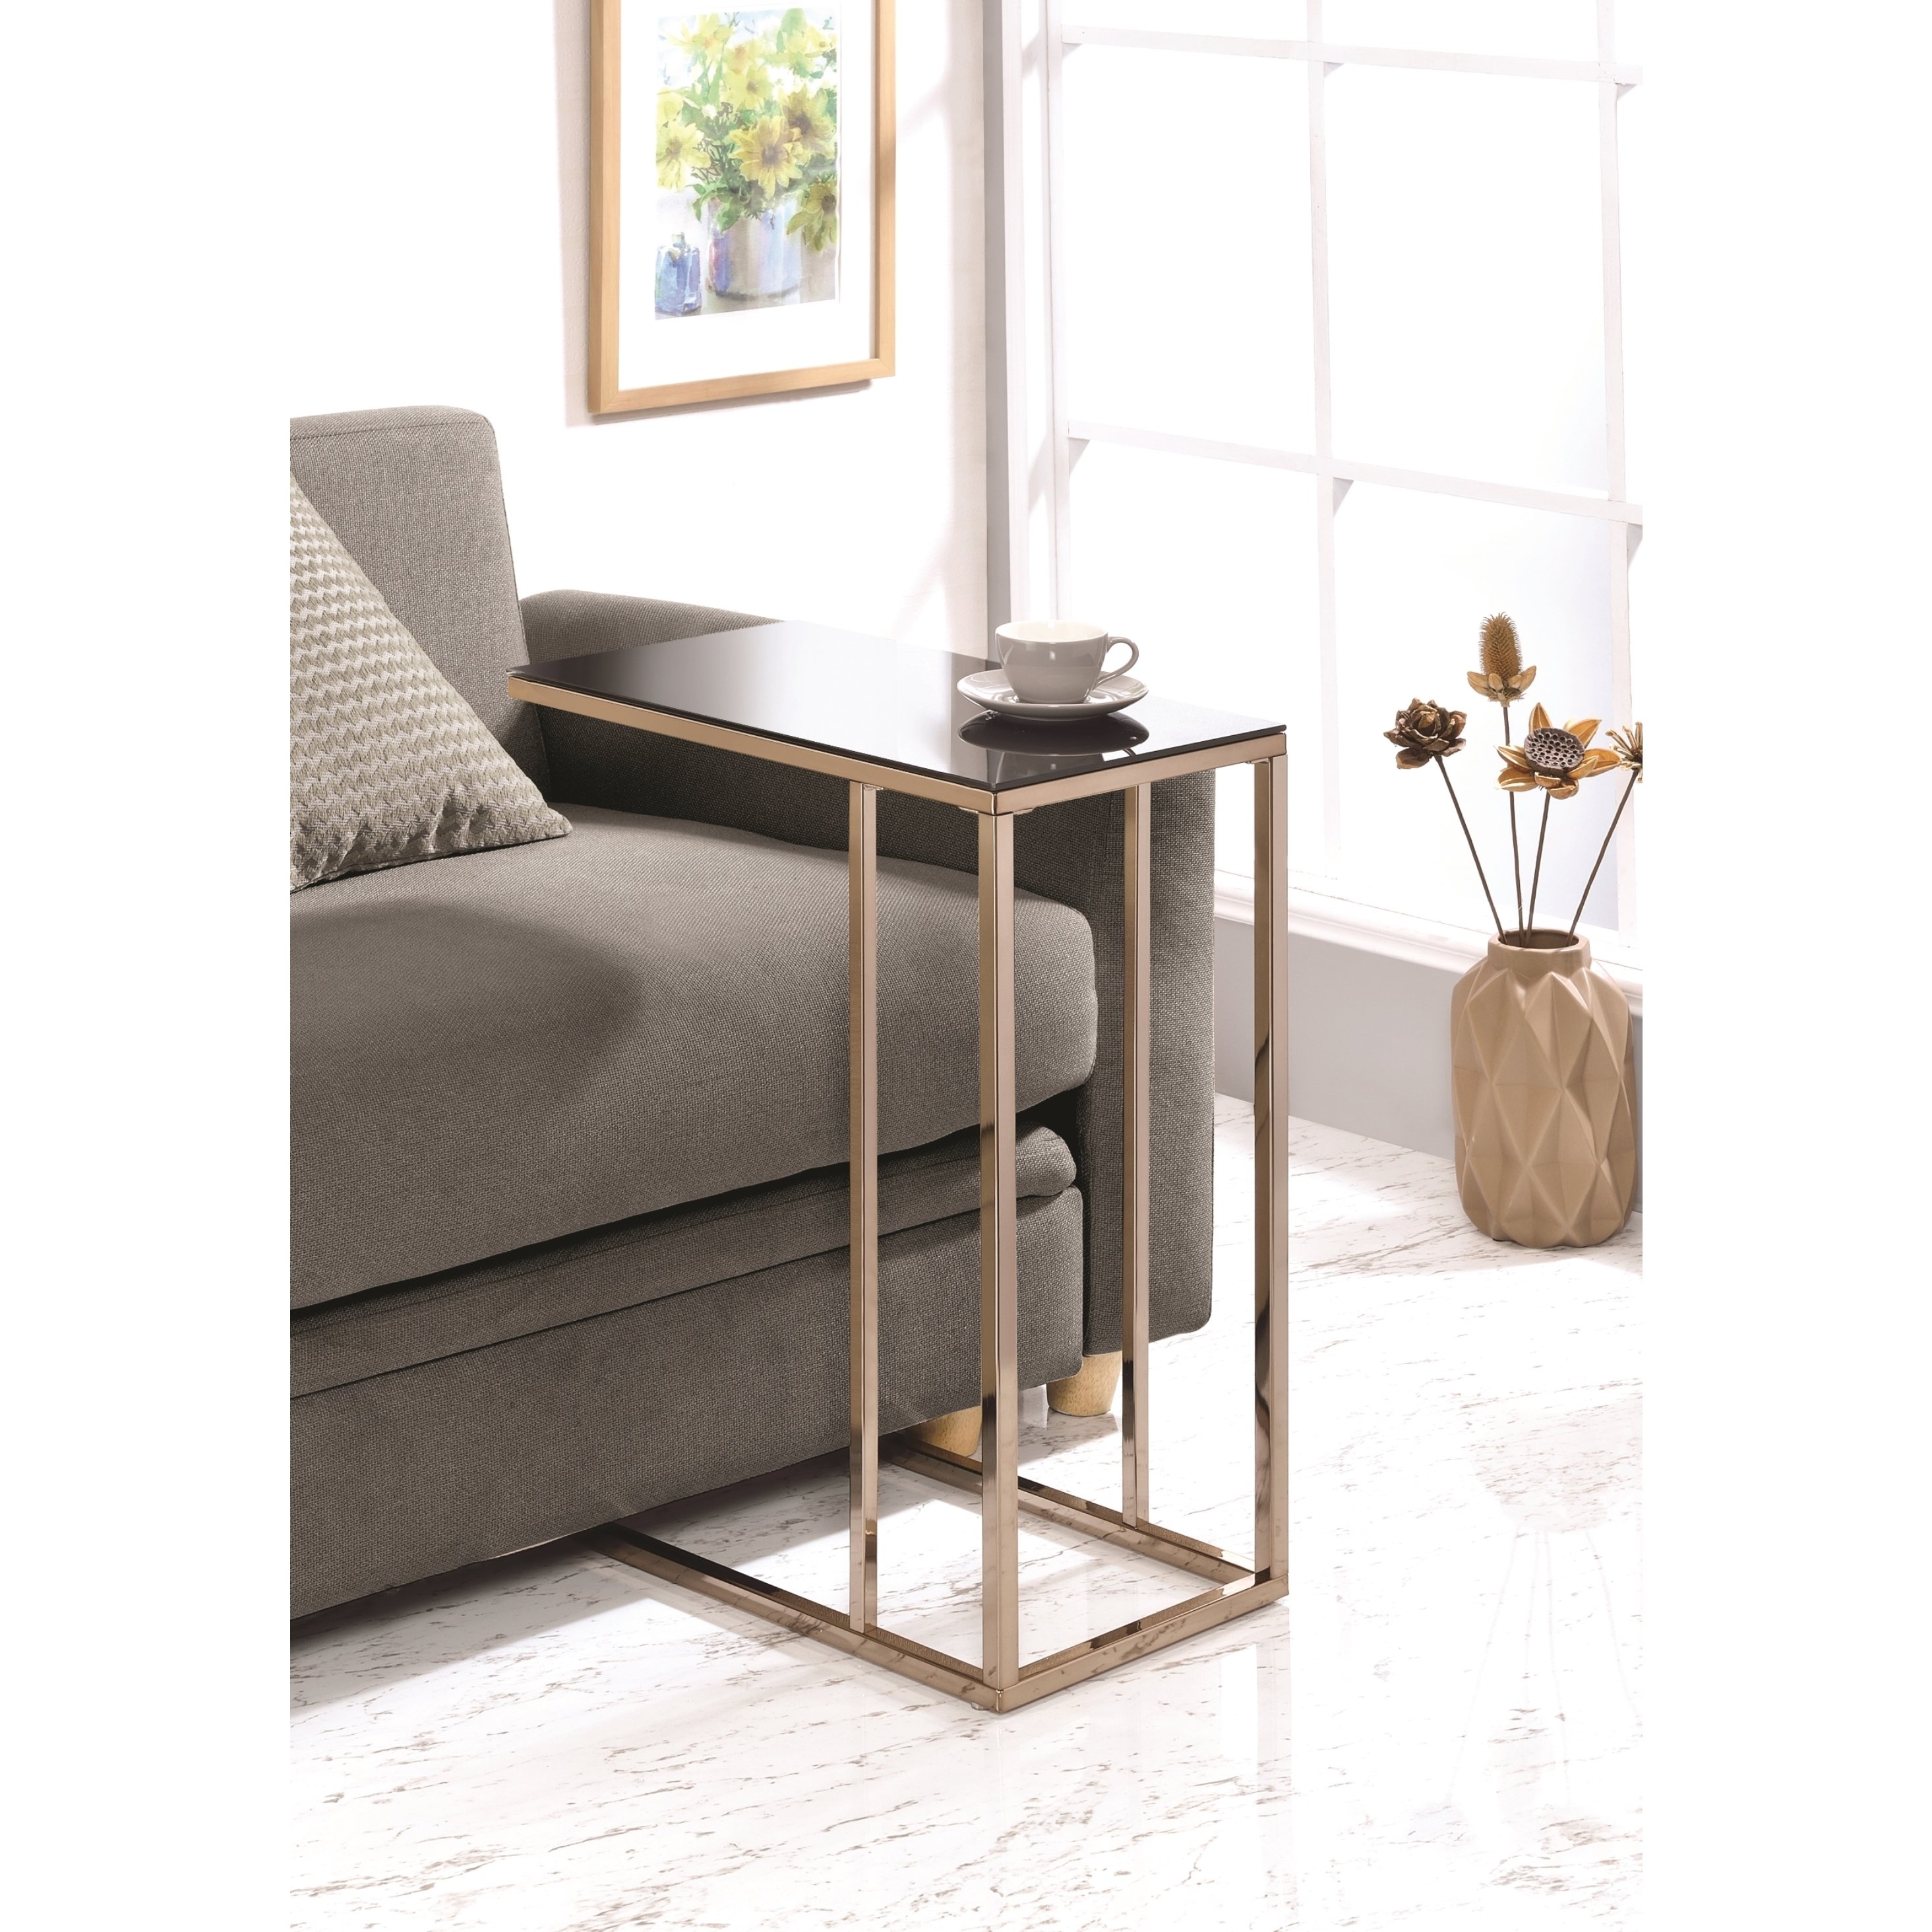 modern design chocolate chrome living room accent table with black tempered glass top free shipping today small cordless lamps outdoor chair set ikea toy storage box canadian tire